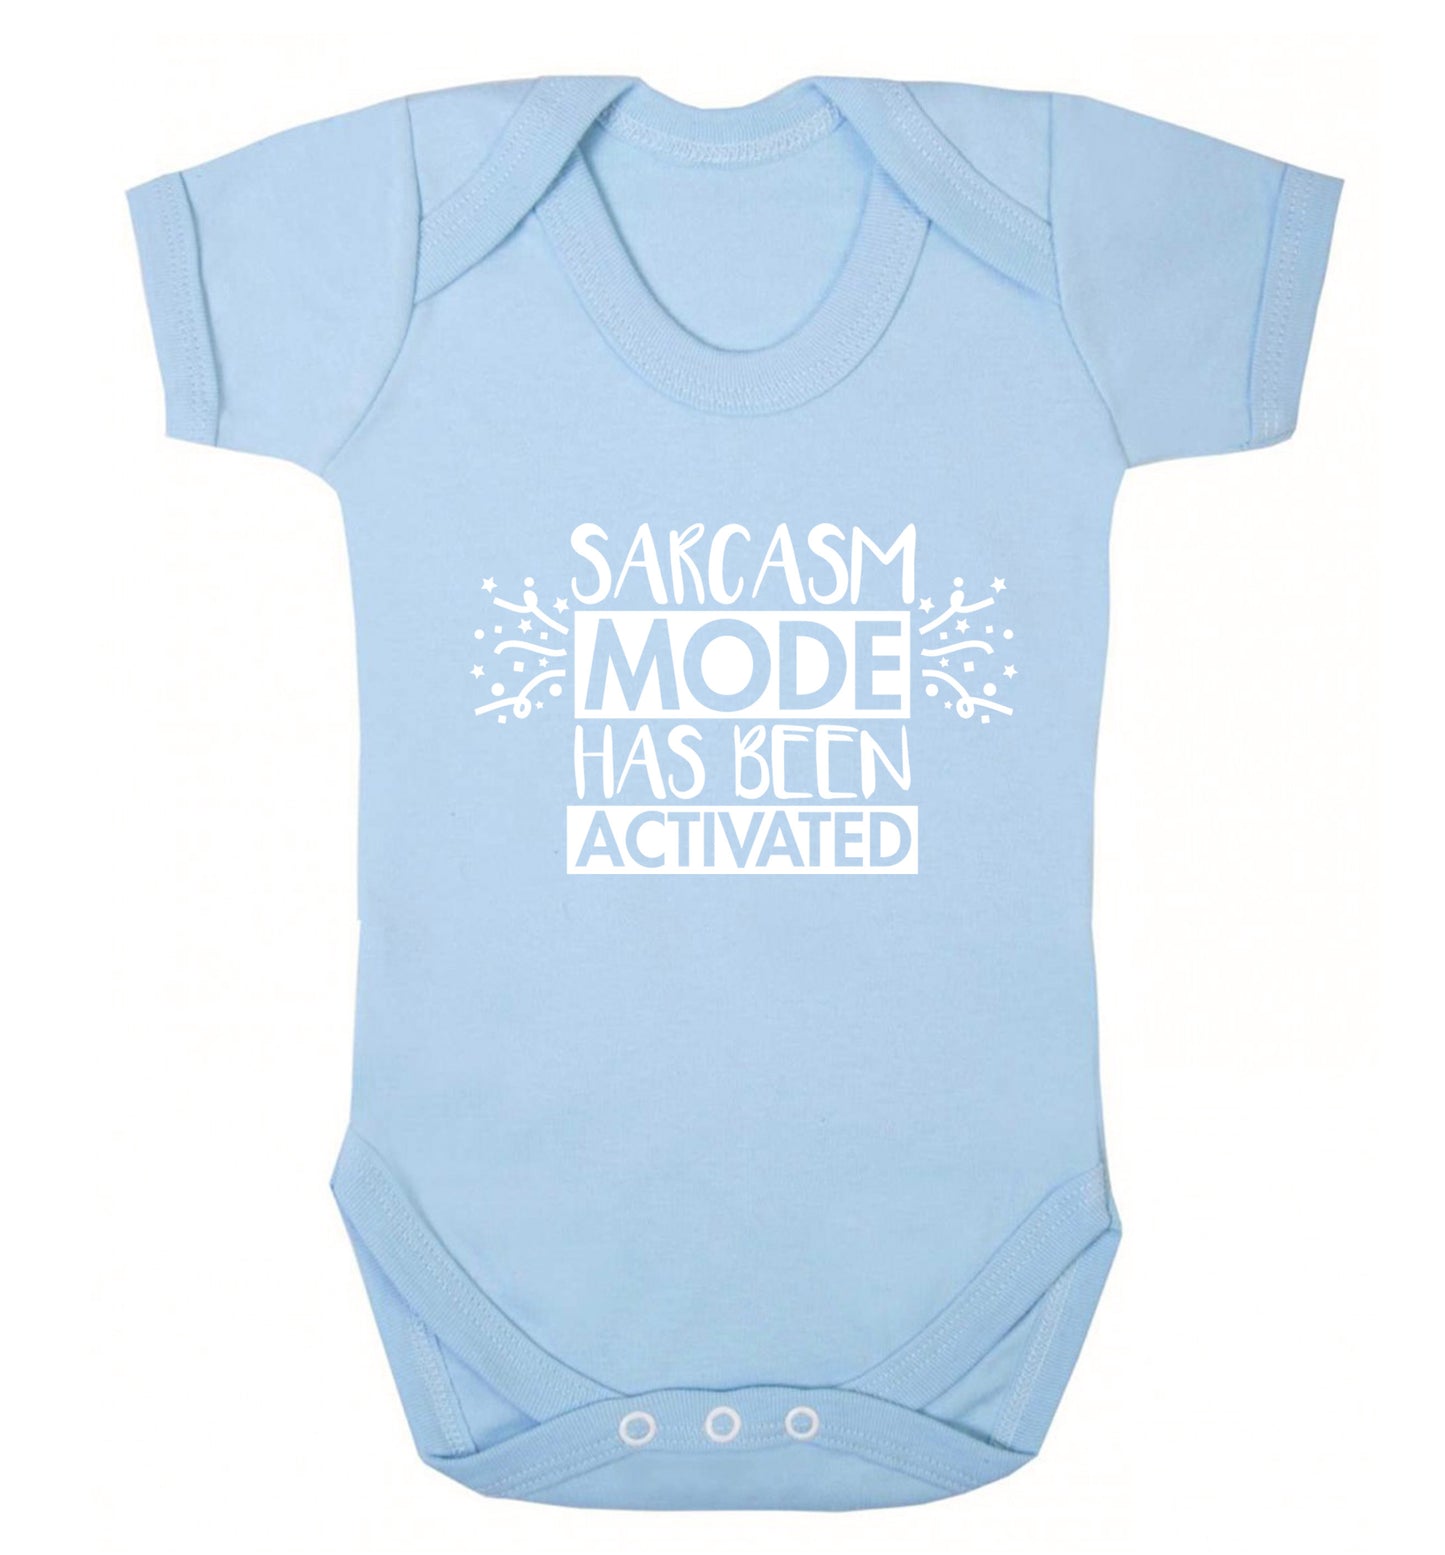 Sarcarsm mode has been activated Baby Vest pale blue 18-24 months